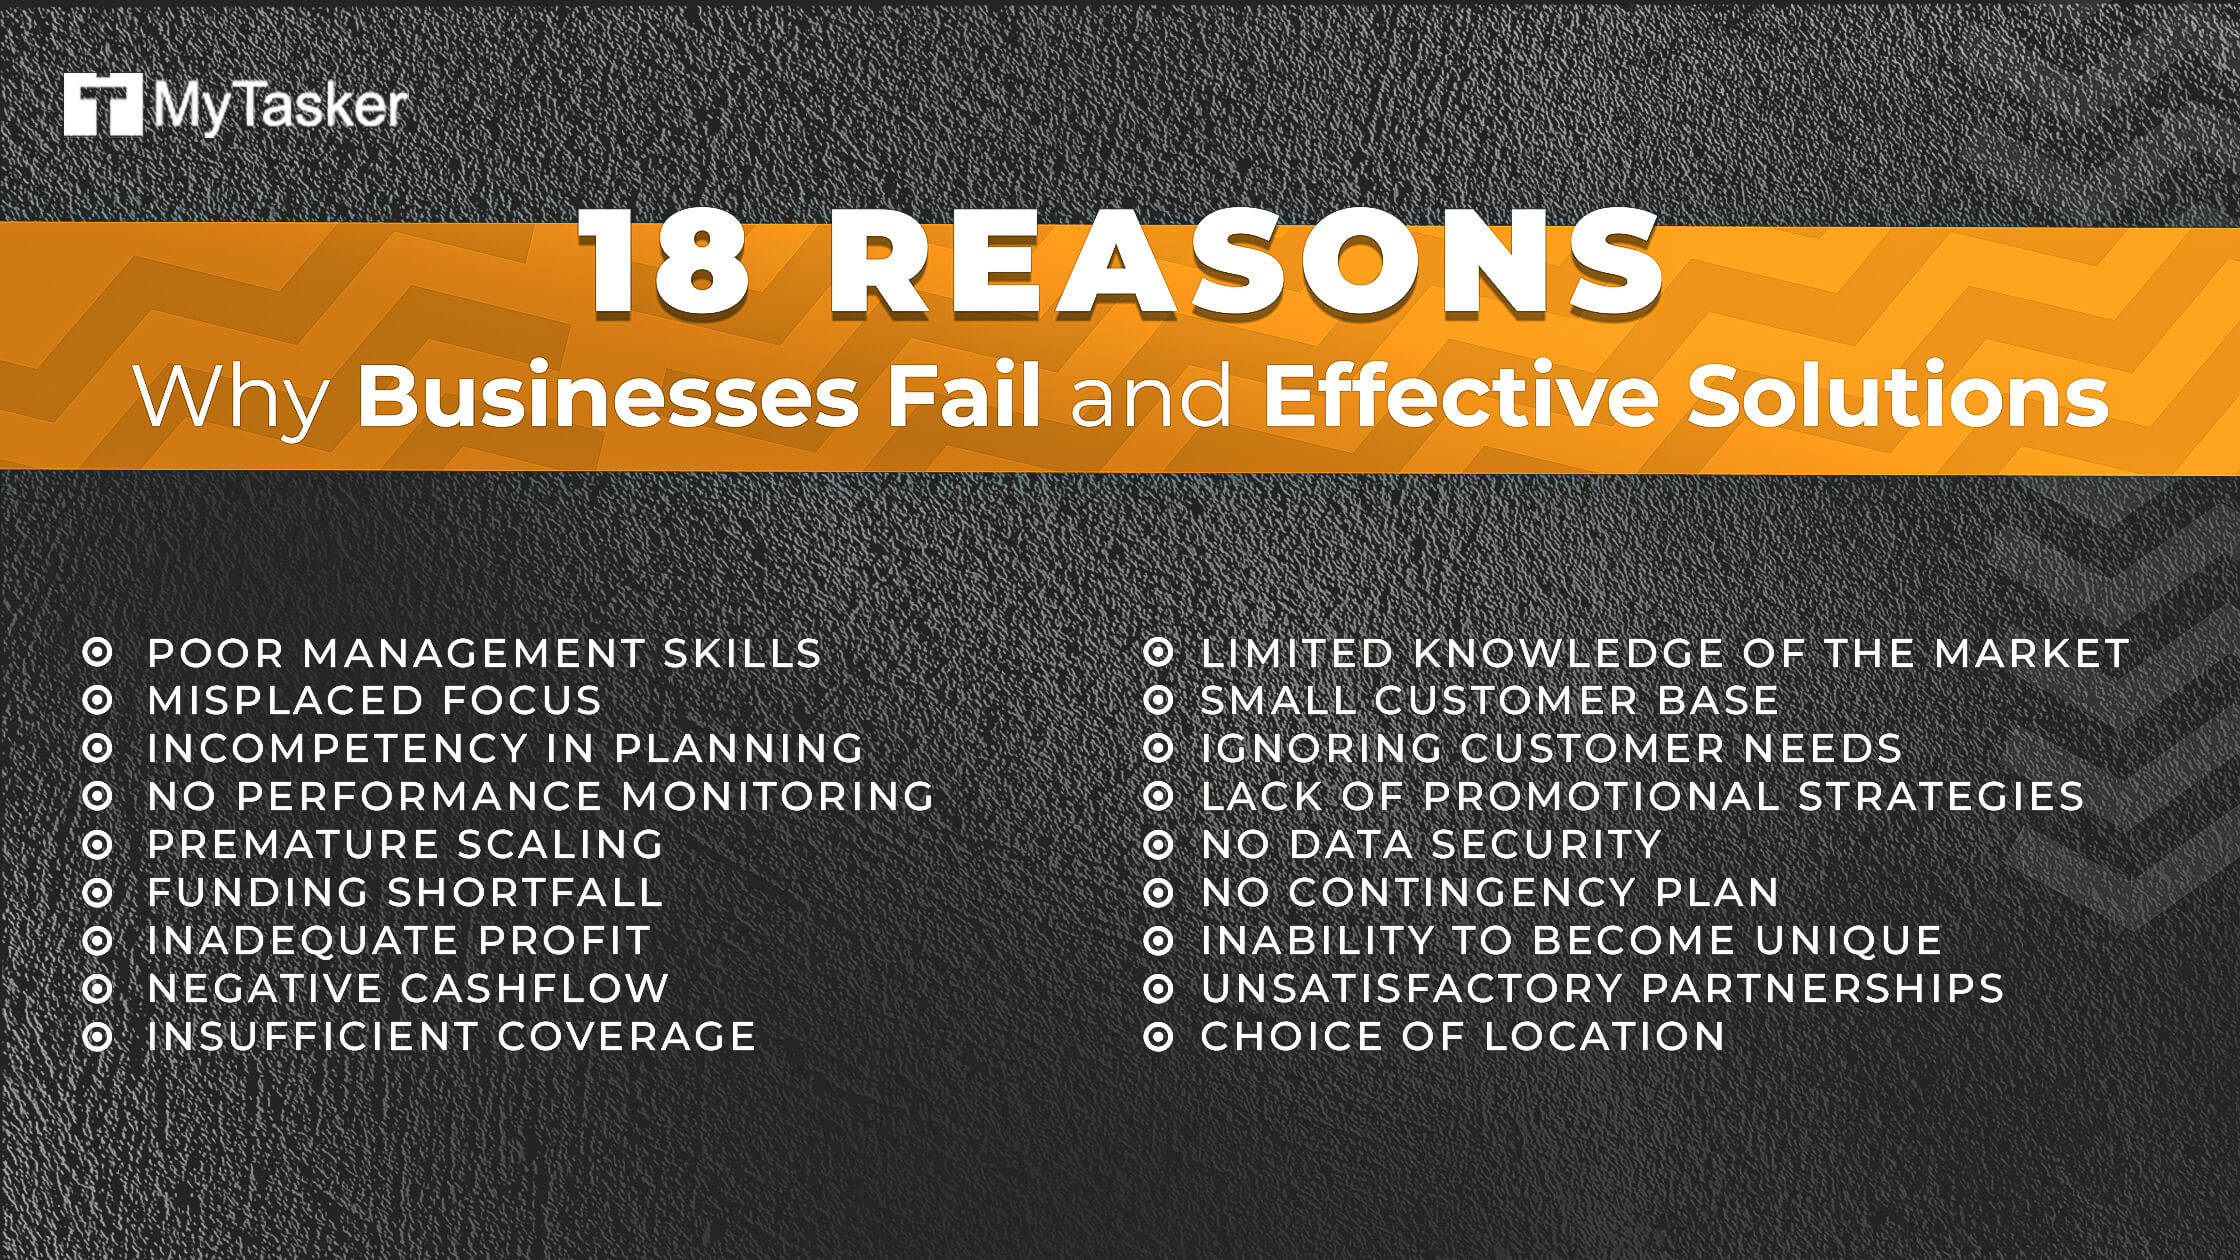 18 Reasons Why Businesses Fail and Effective Solutions (Infographic)